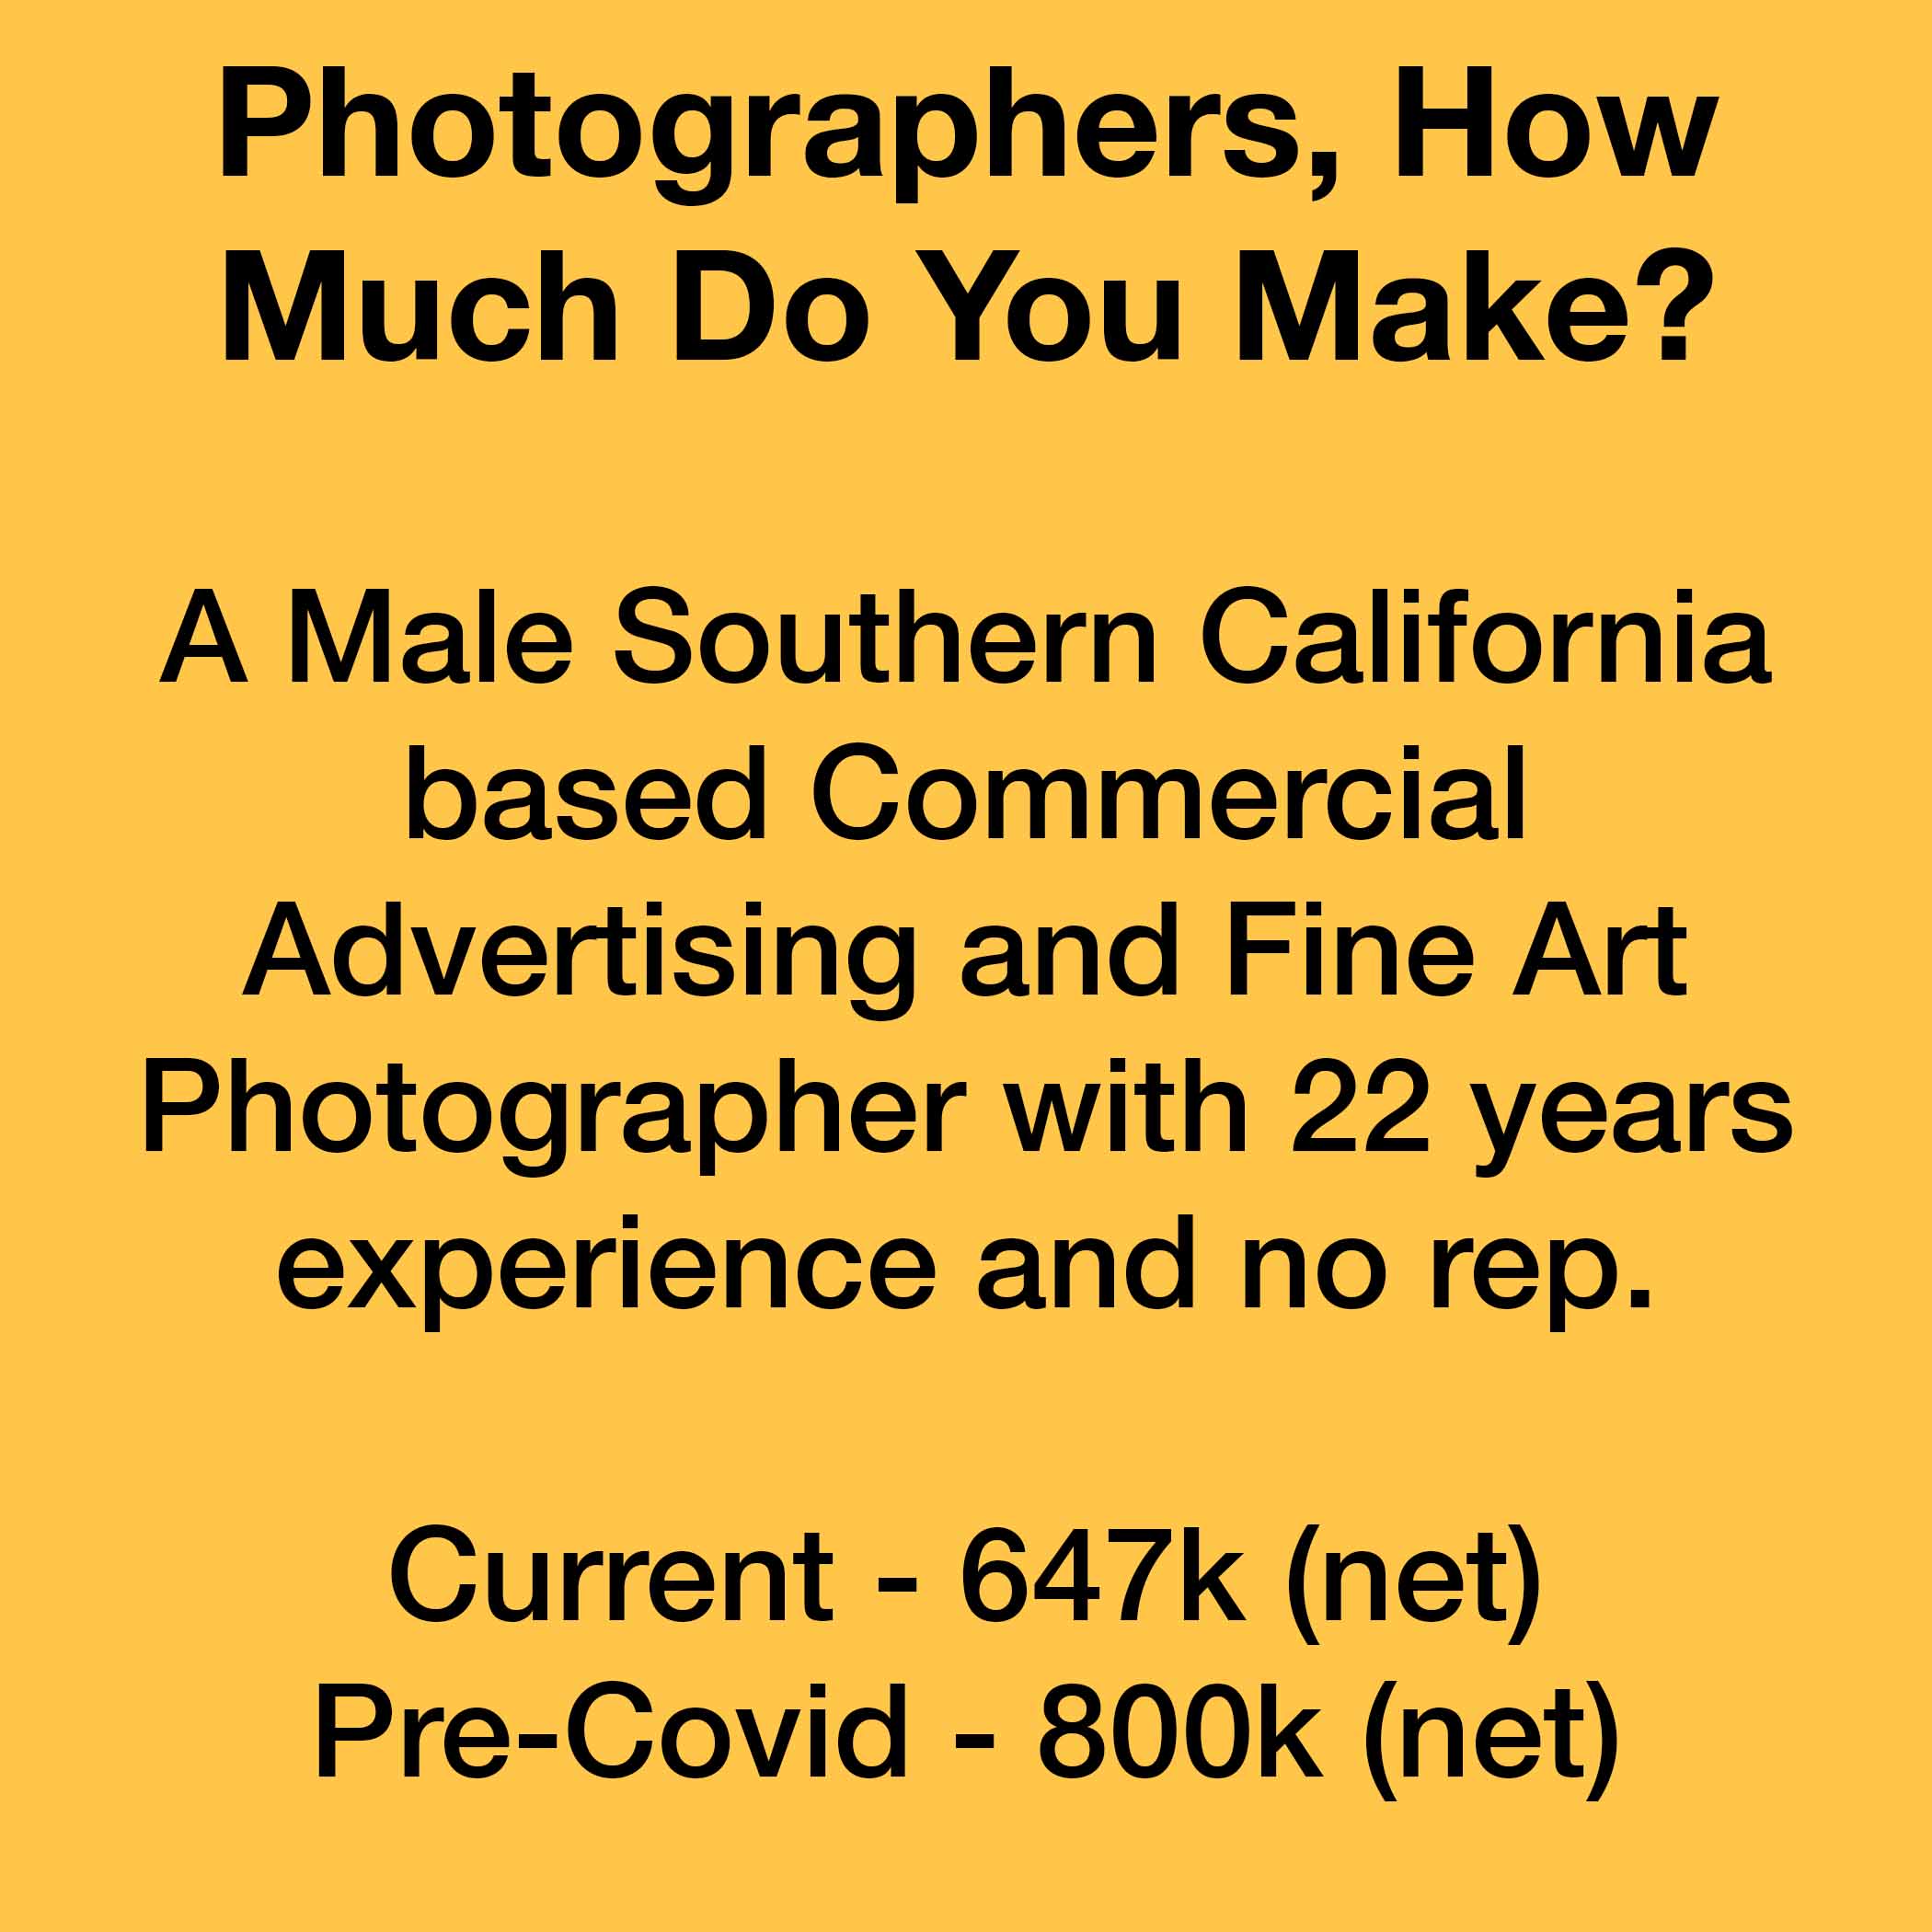 How Much Do You Make – A Male Southern California based Commercial Advertising and Fine Art Photographer with 22 years experience and no rep.